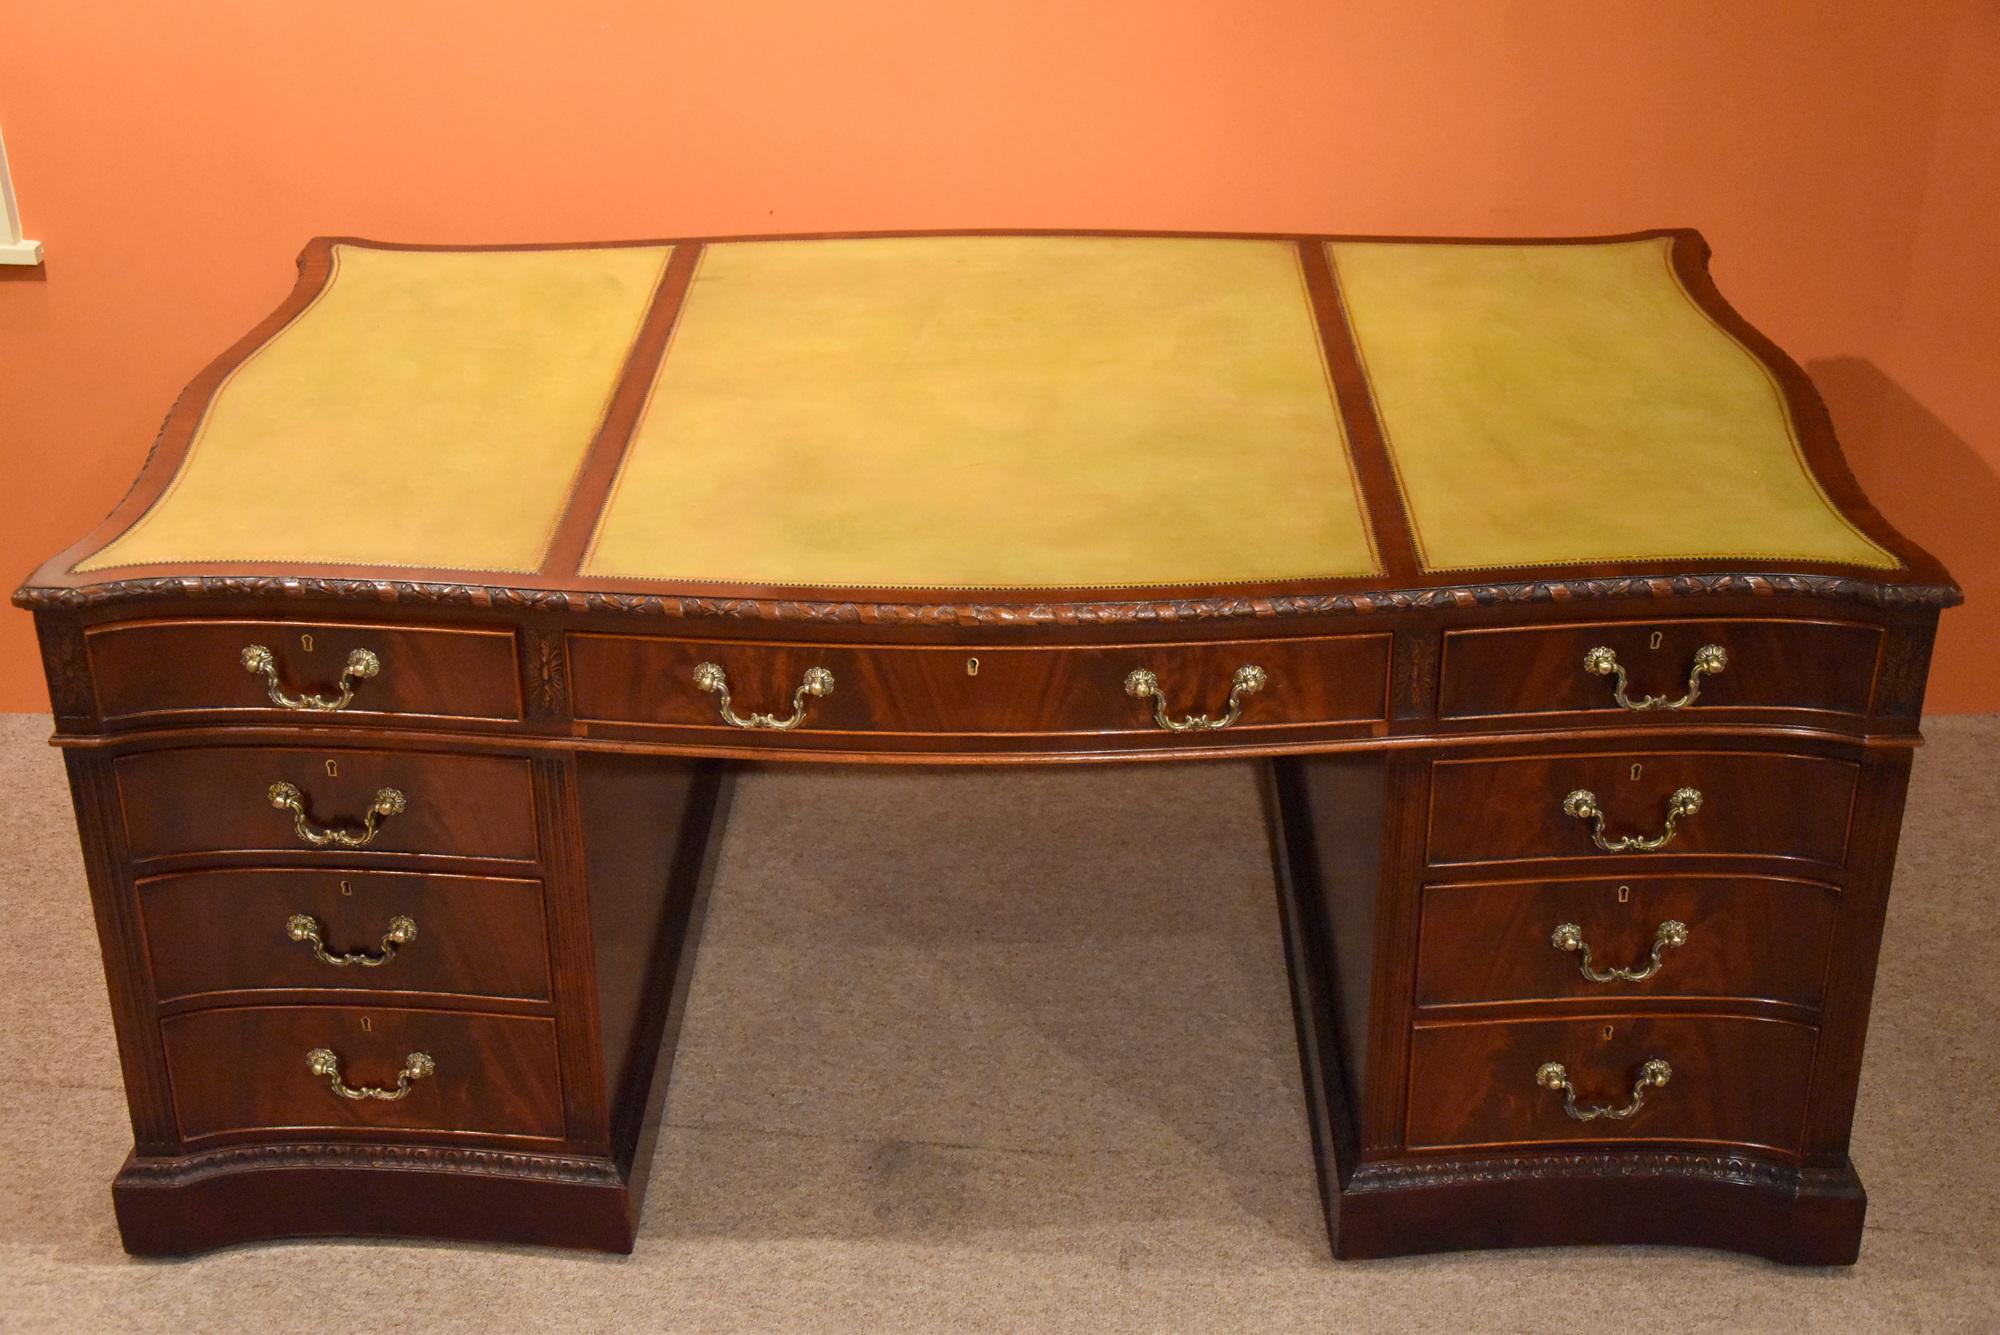 George III style mahogany serpentine partners desk a rare and impressive large mahogany serpentine shaped pedestal partners desk in the manner of Thomas Chippendale. The recently triple panel light green leather inset top sits above an arrangement